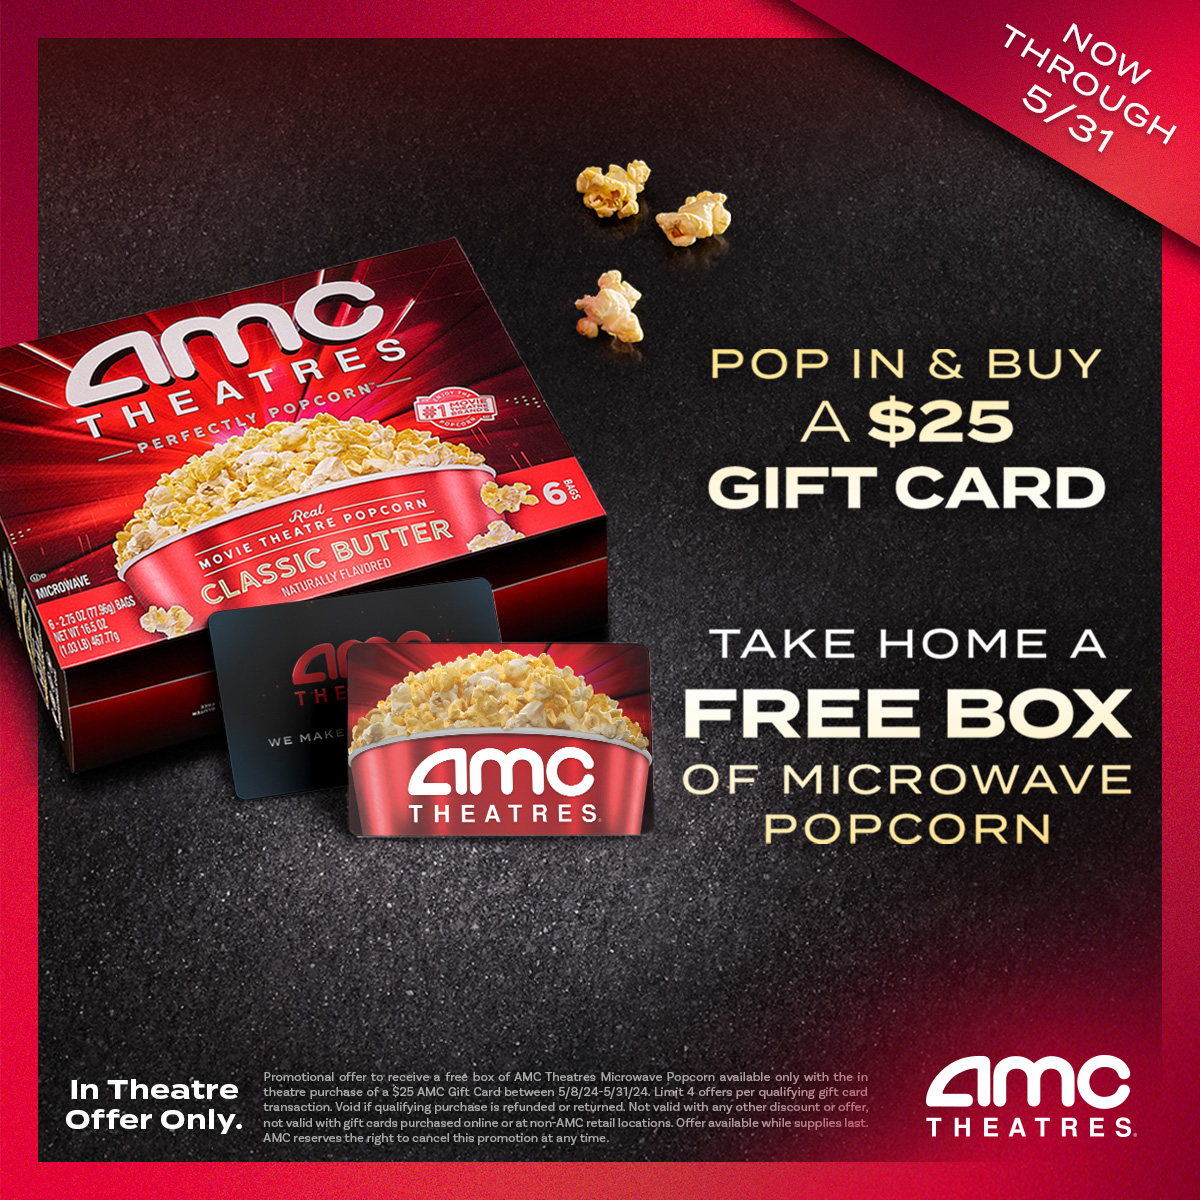 🍿 For every $25 gift card purchased in theatres, bring home The Flavor of the Movies with a FREE box of our AMC Theatres Microwave Popcorn. Give someone special a gift you can both savor, now through 5/31! amc.film/4dYsEM2